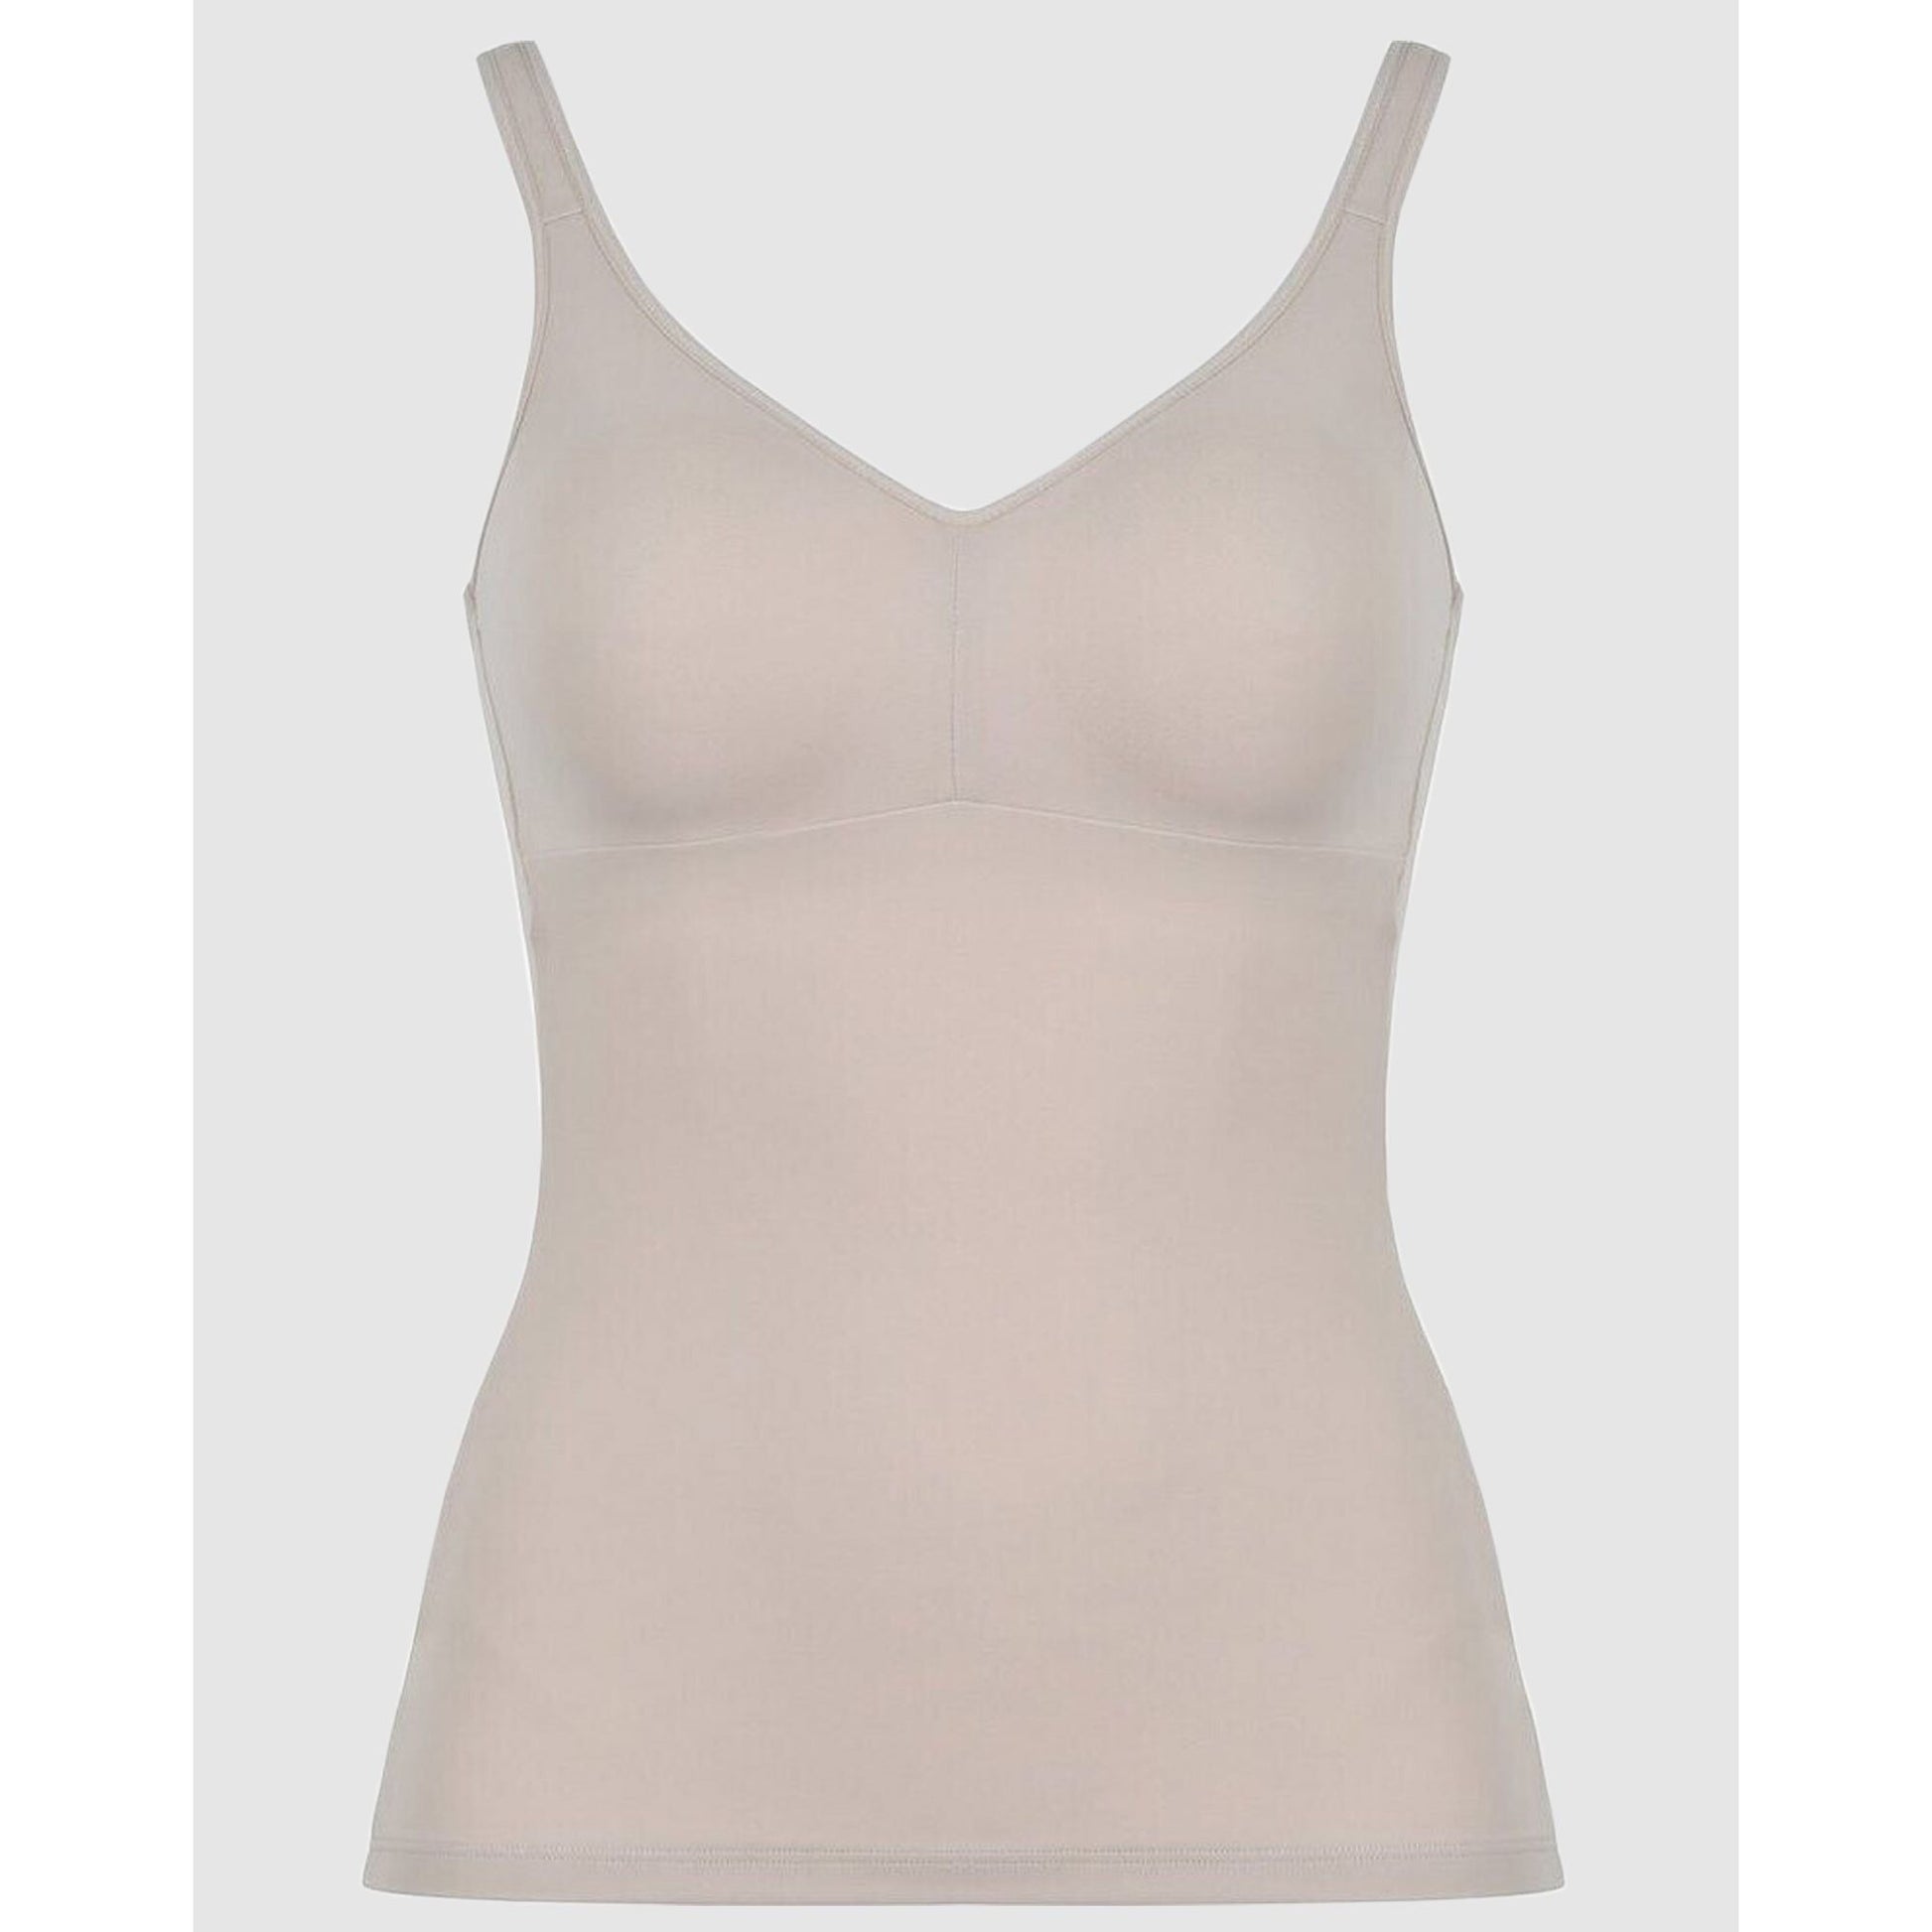 Elasticup Stretch Camisole With Built-In Bra - Style Gallery